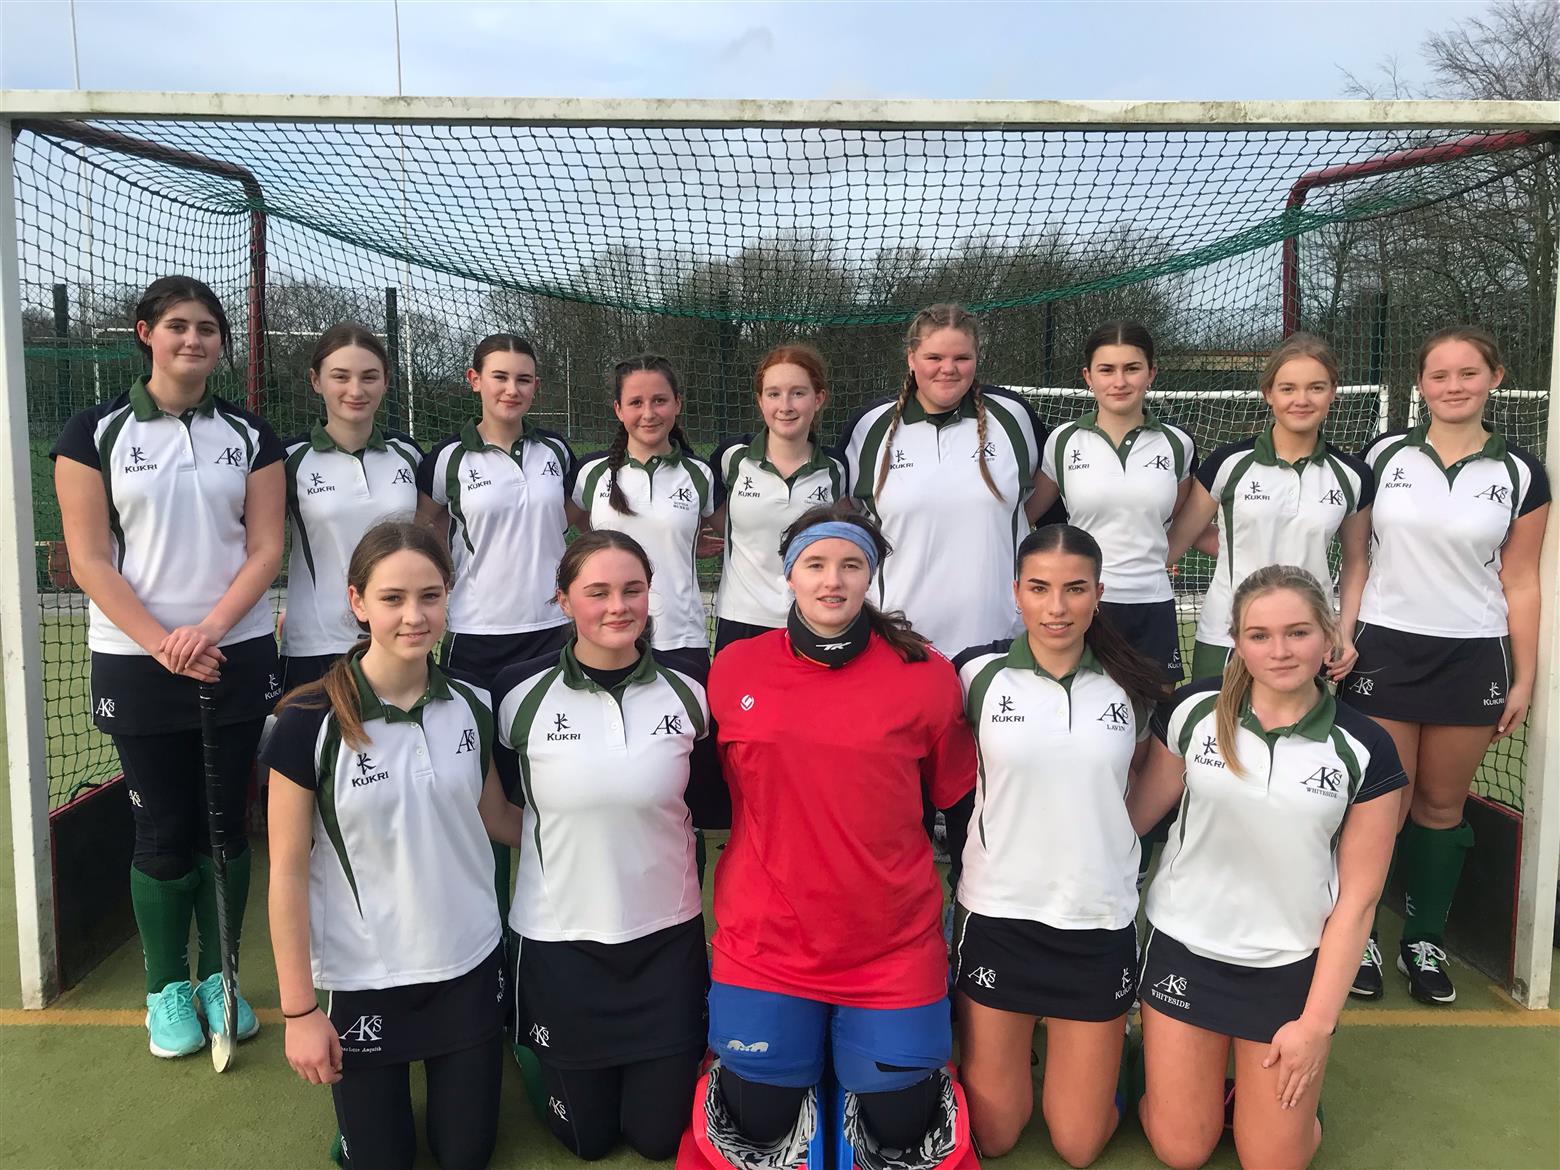 U15 Hockey record back to back wins against Stonyhurst and Wilmslow High